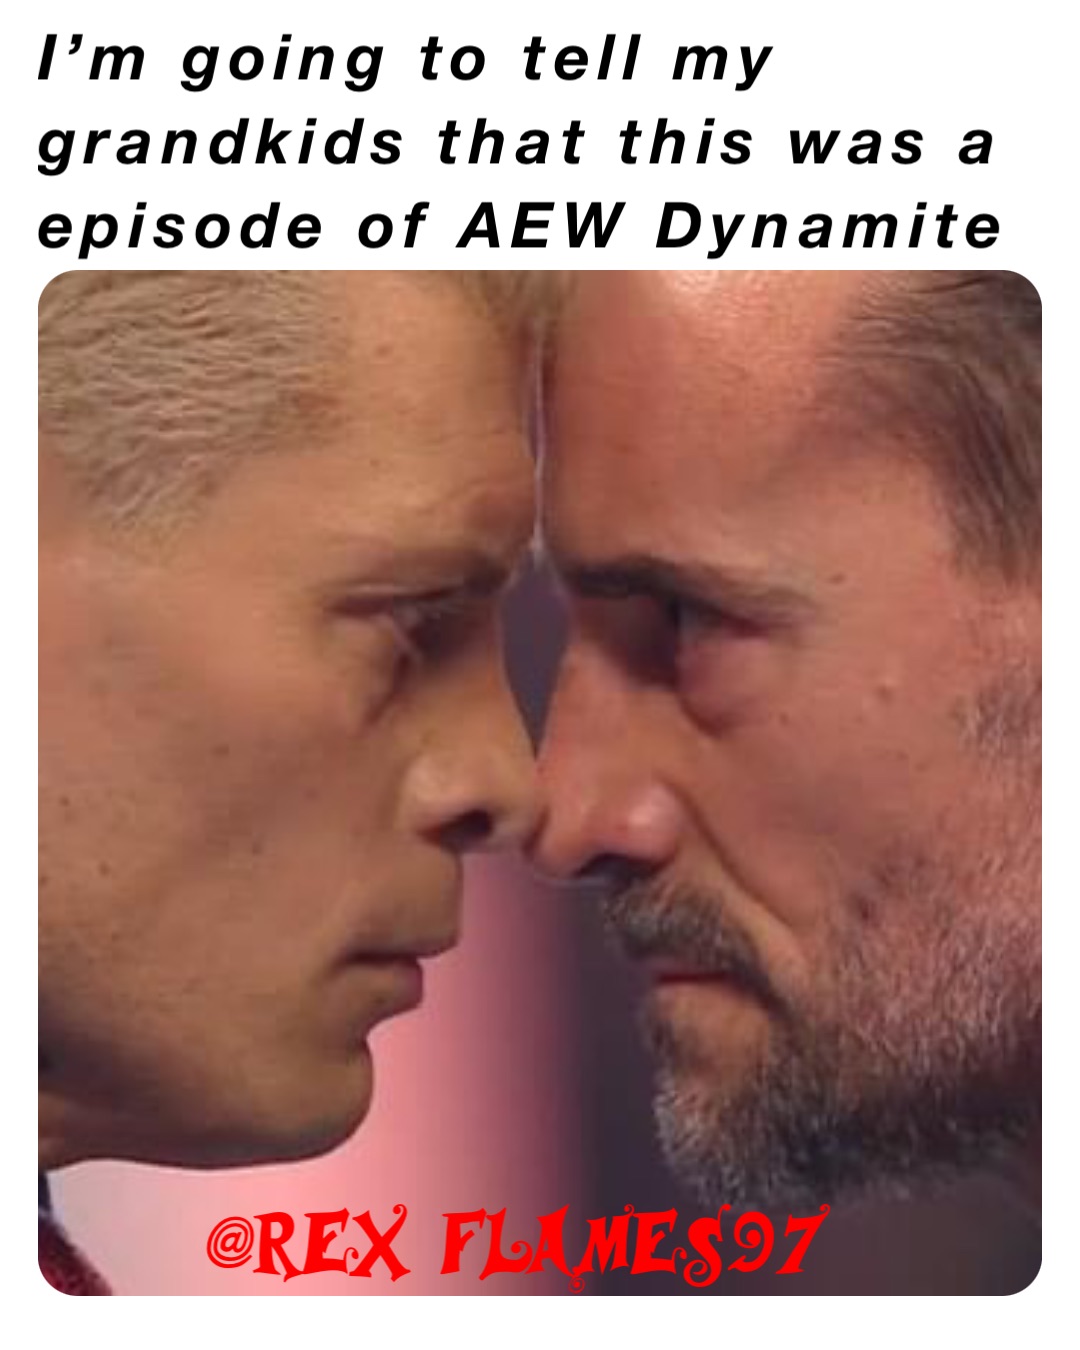 I’m going to tell my grandkids that this was a episode of AEW Dynamite